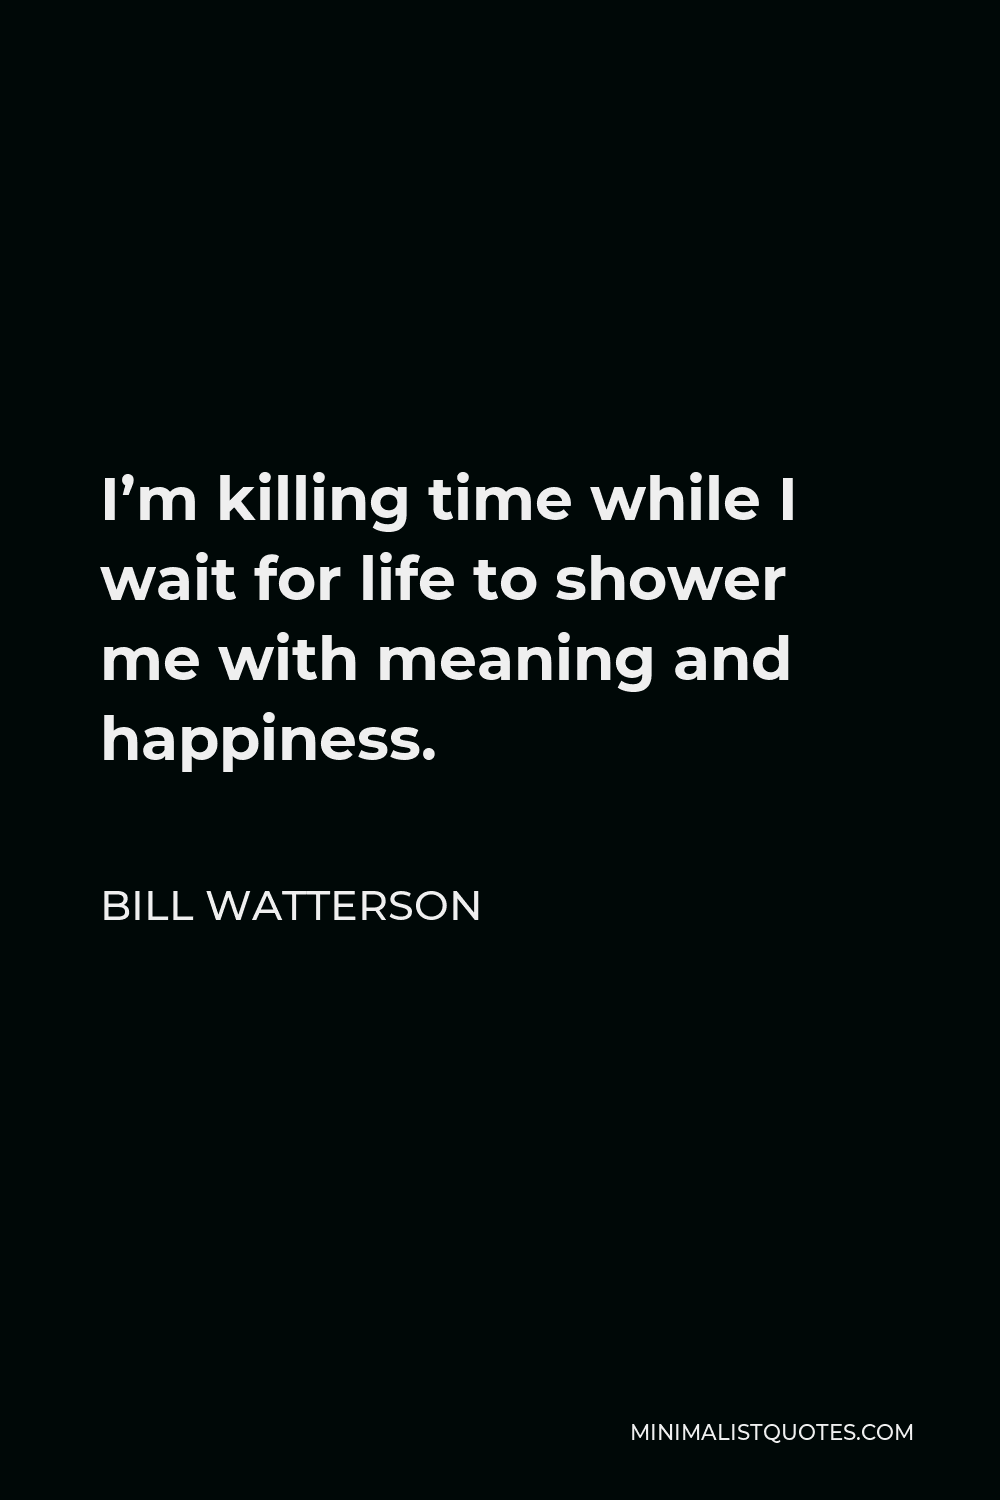 Bill Watterson Quote - I’m killing time while I wait for life to shower me with meaning and happiness.